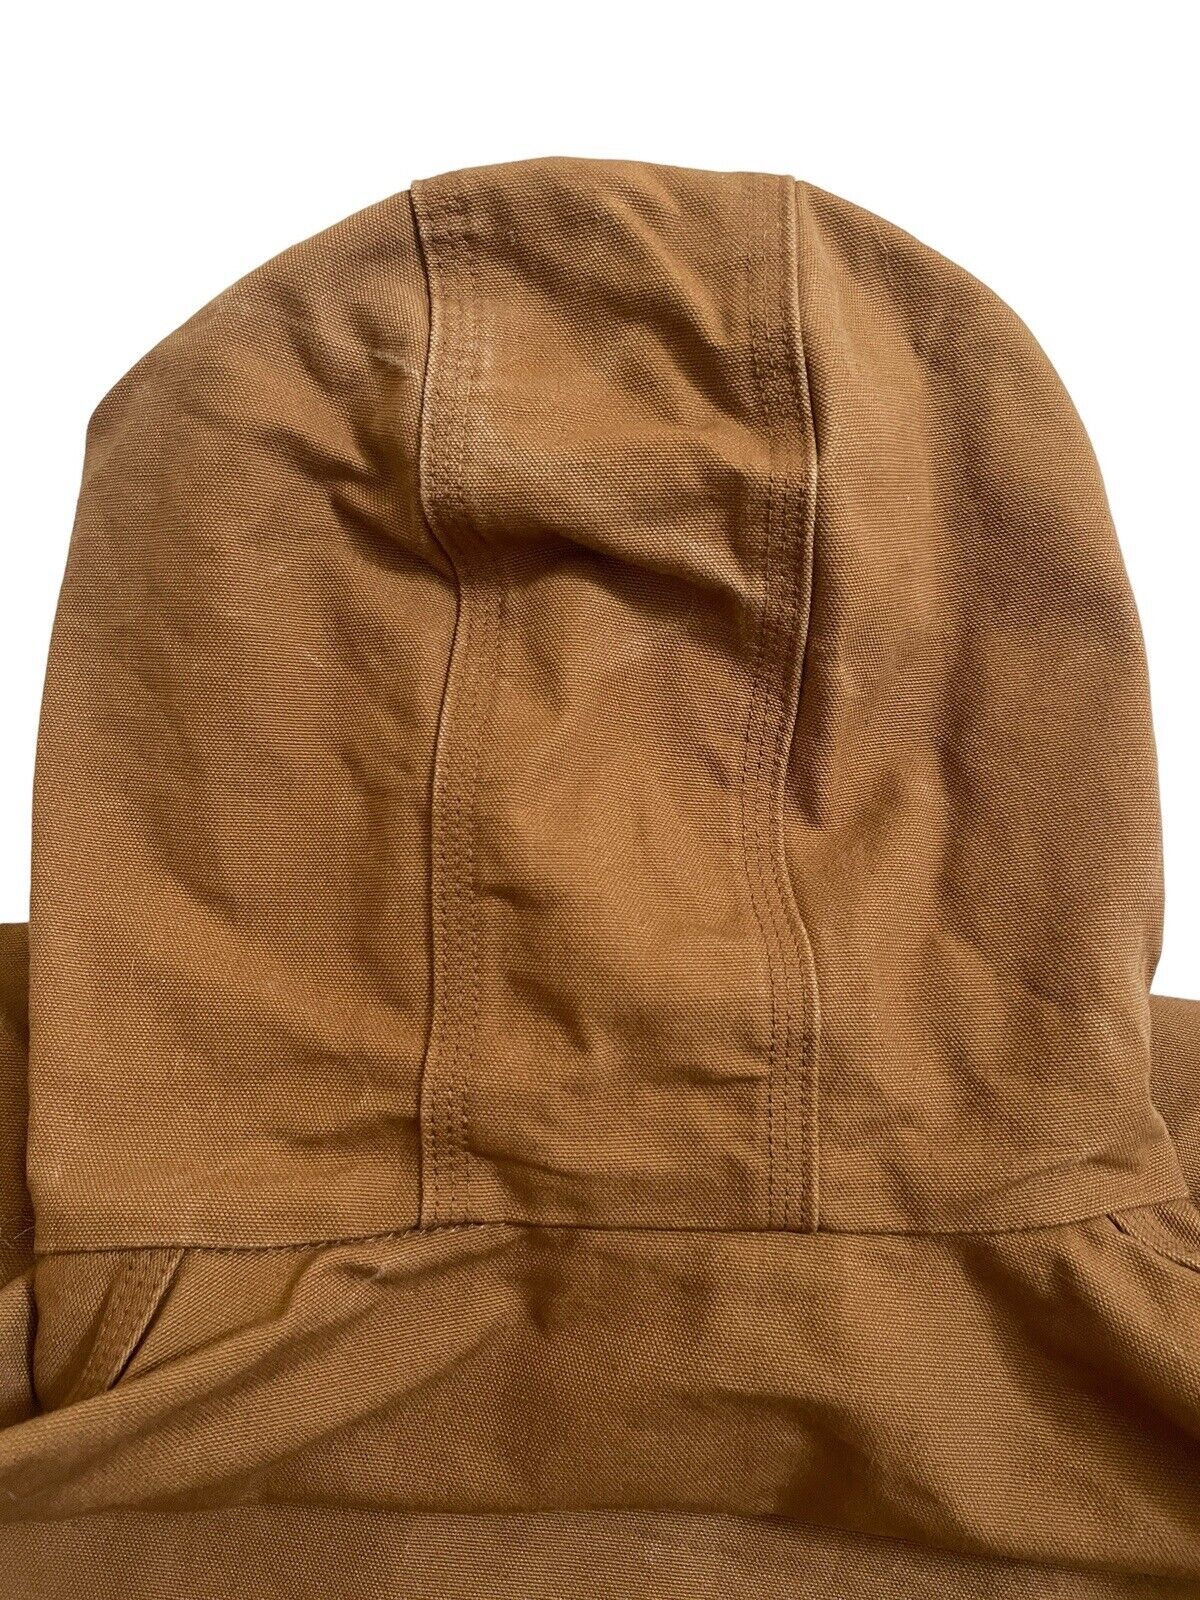 Carhartt Mens 2XL J131 Brown Thermal Lined Duck A… - image 21